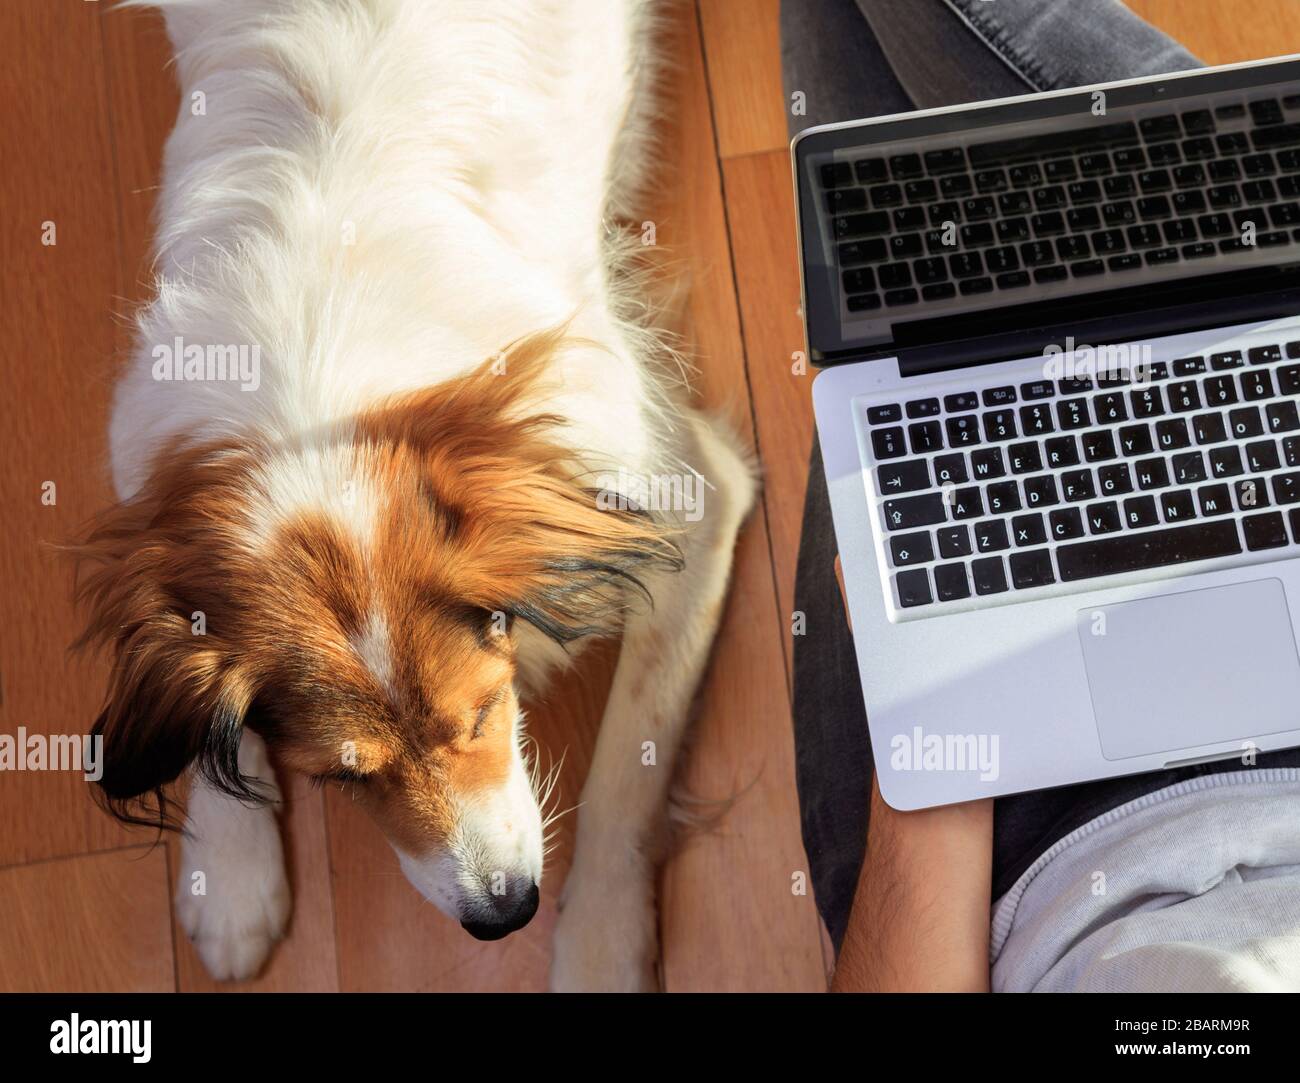 Home office, remote work. Young man with a computer laptop and his dog. Telecommute, teleworking, work from home, making use of the Internet, email, a Stock Photo